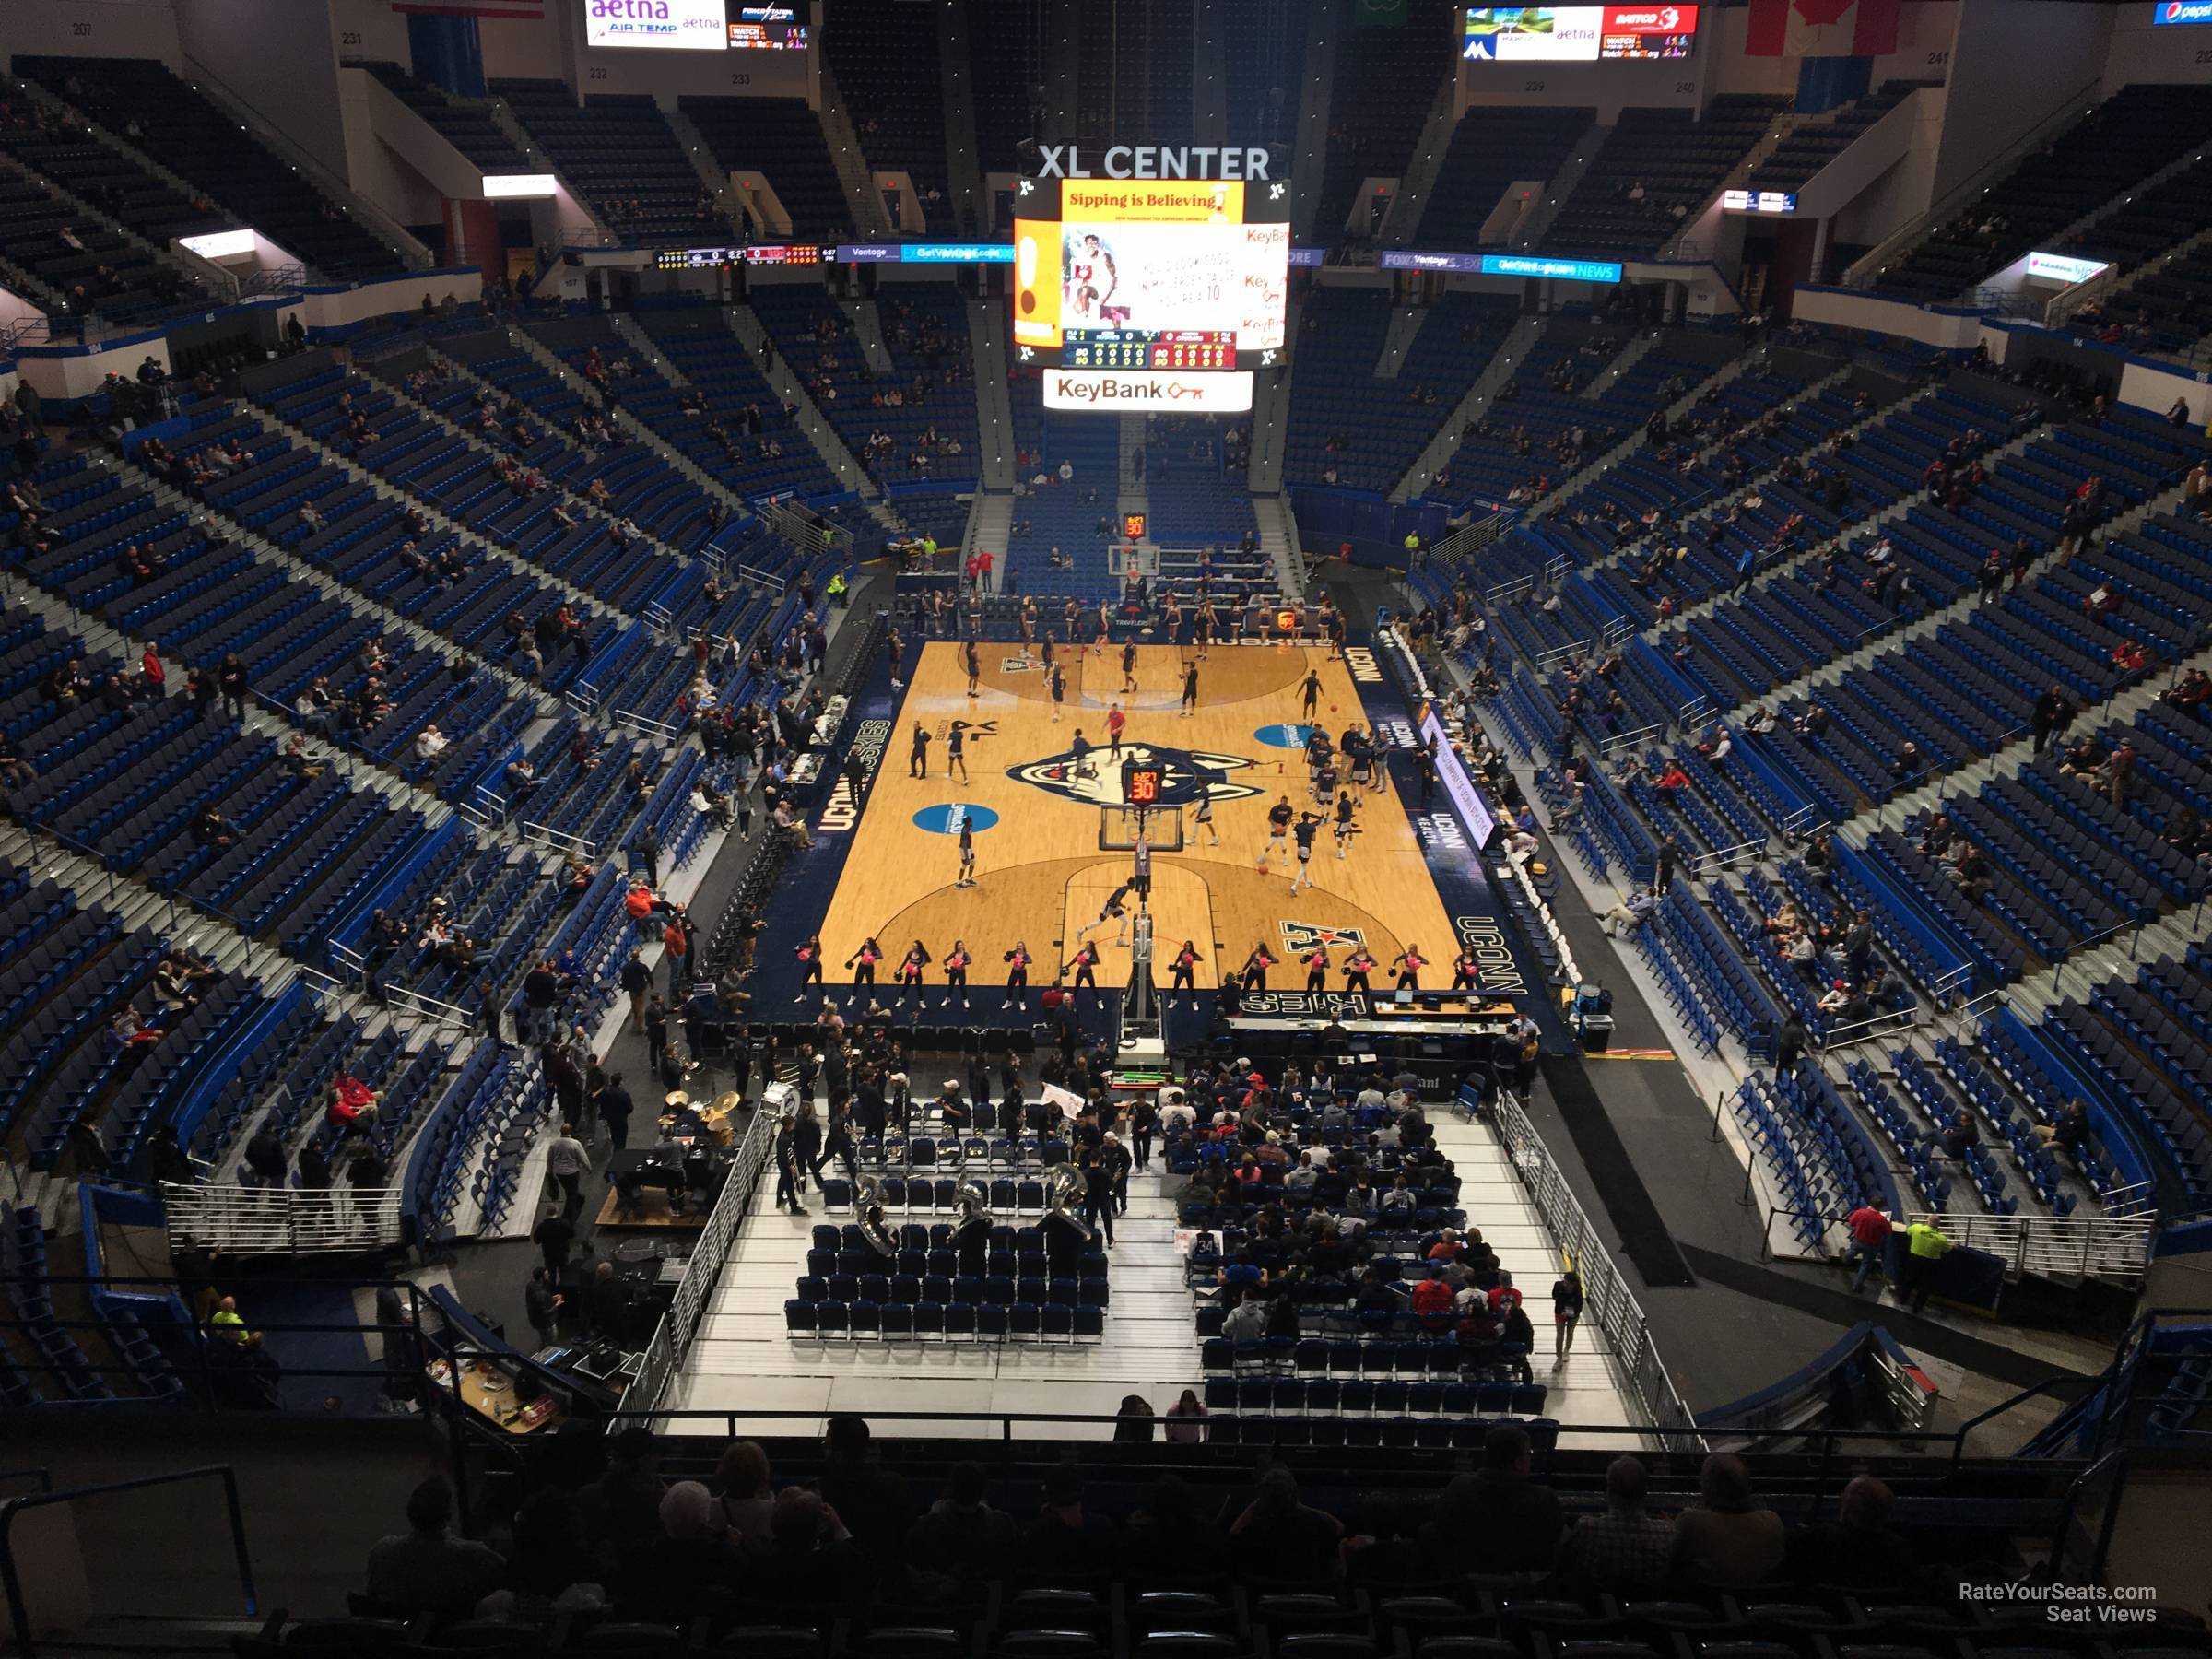 section 225, row j seat view  - xl center